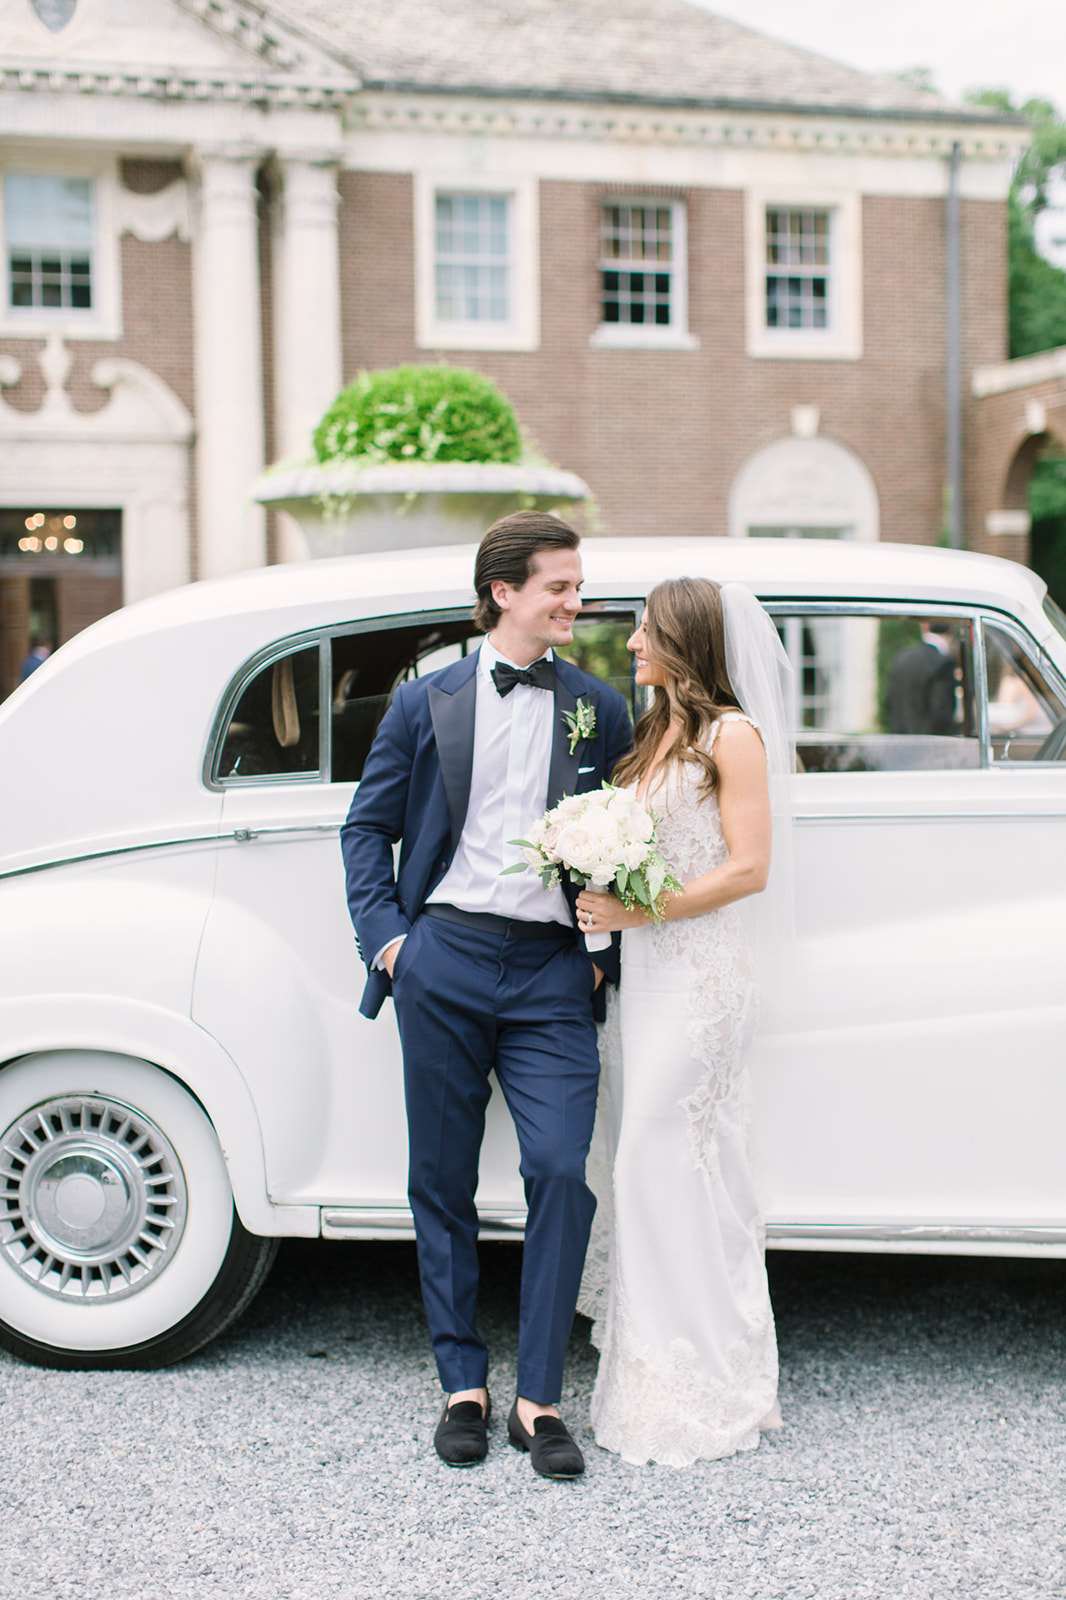 Bride and Groom posing next to a white Rolls Royce car. They are both smiling at each other .